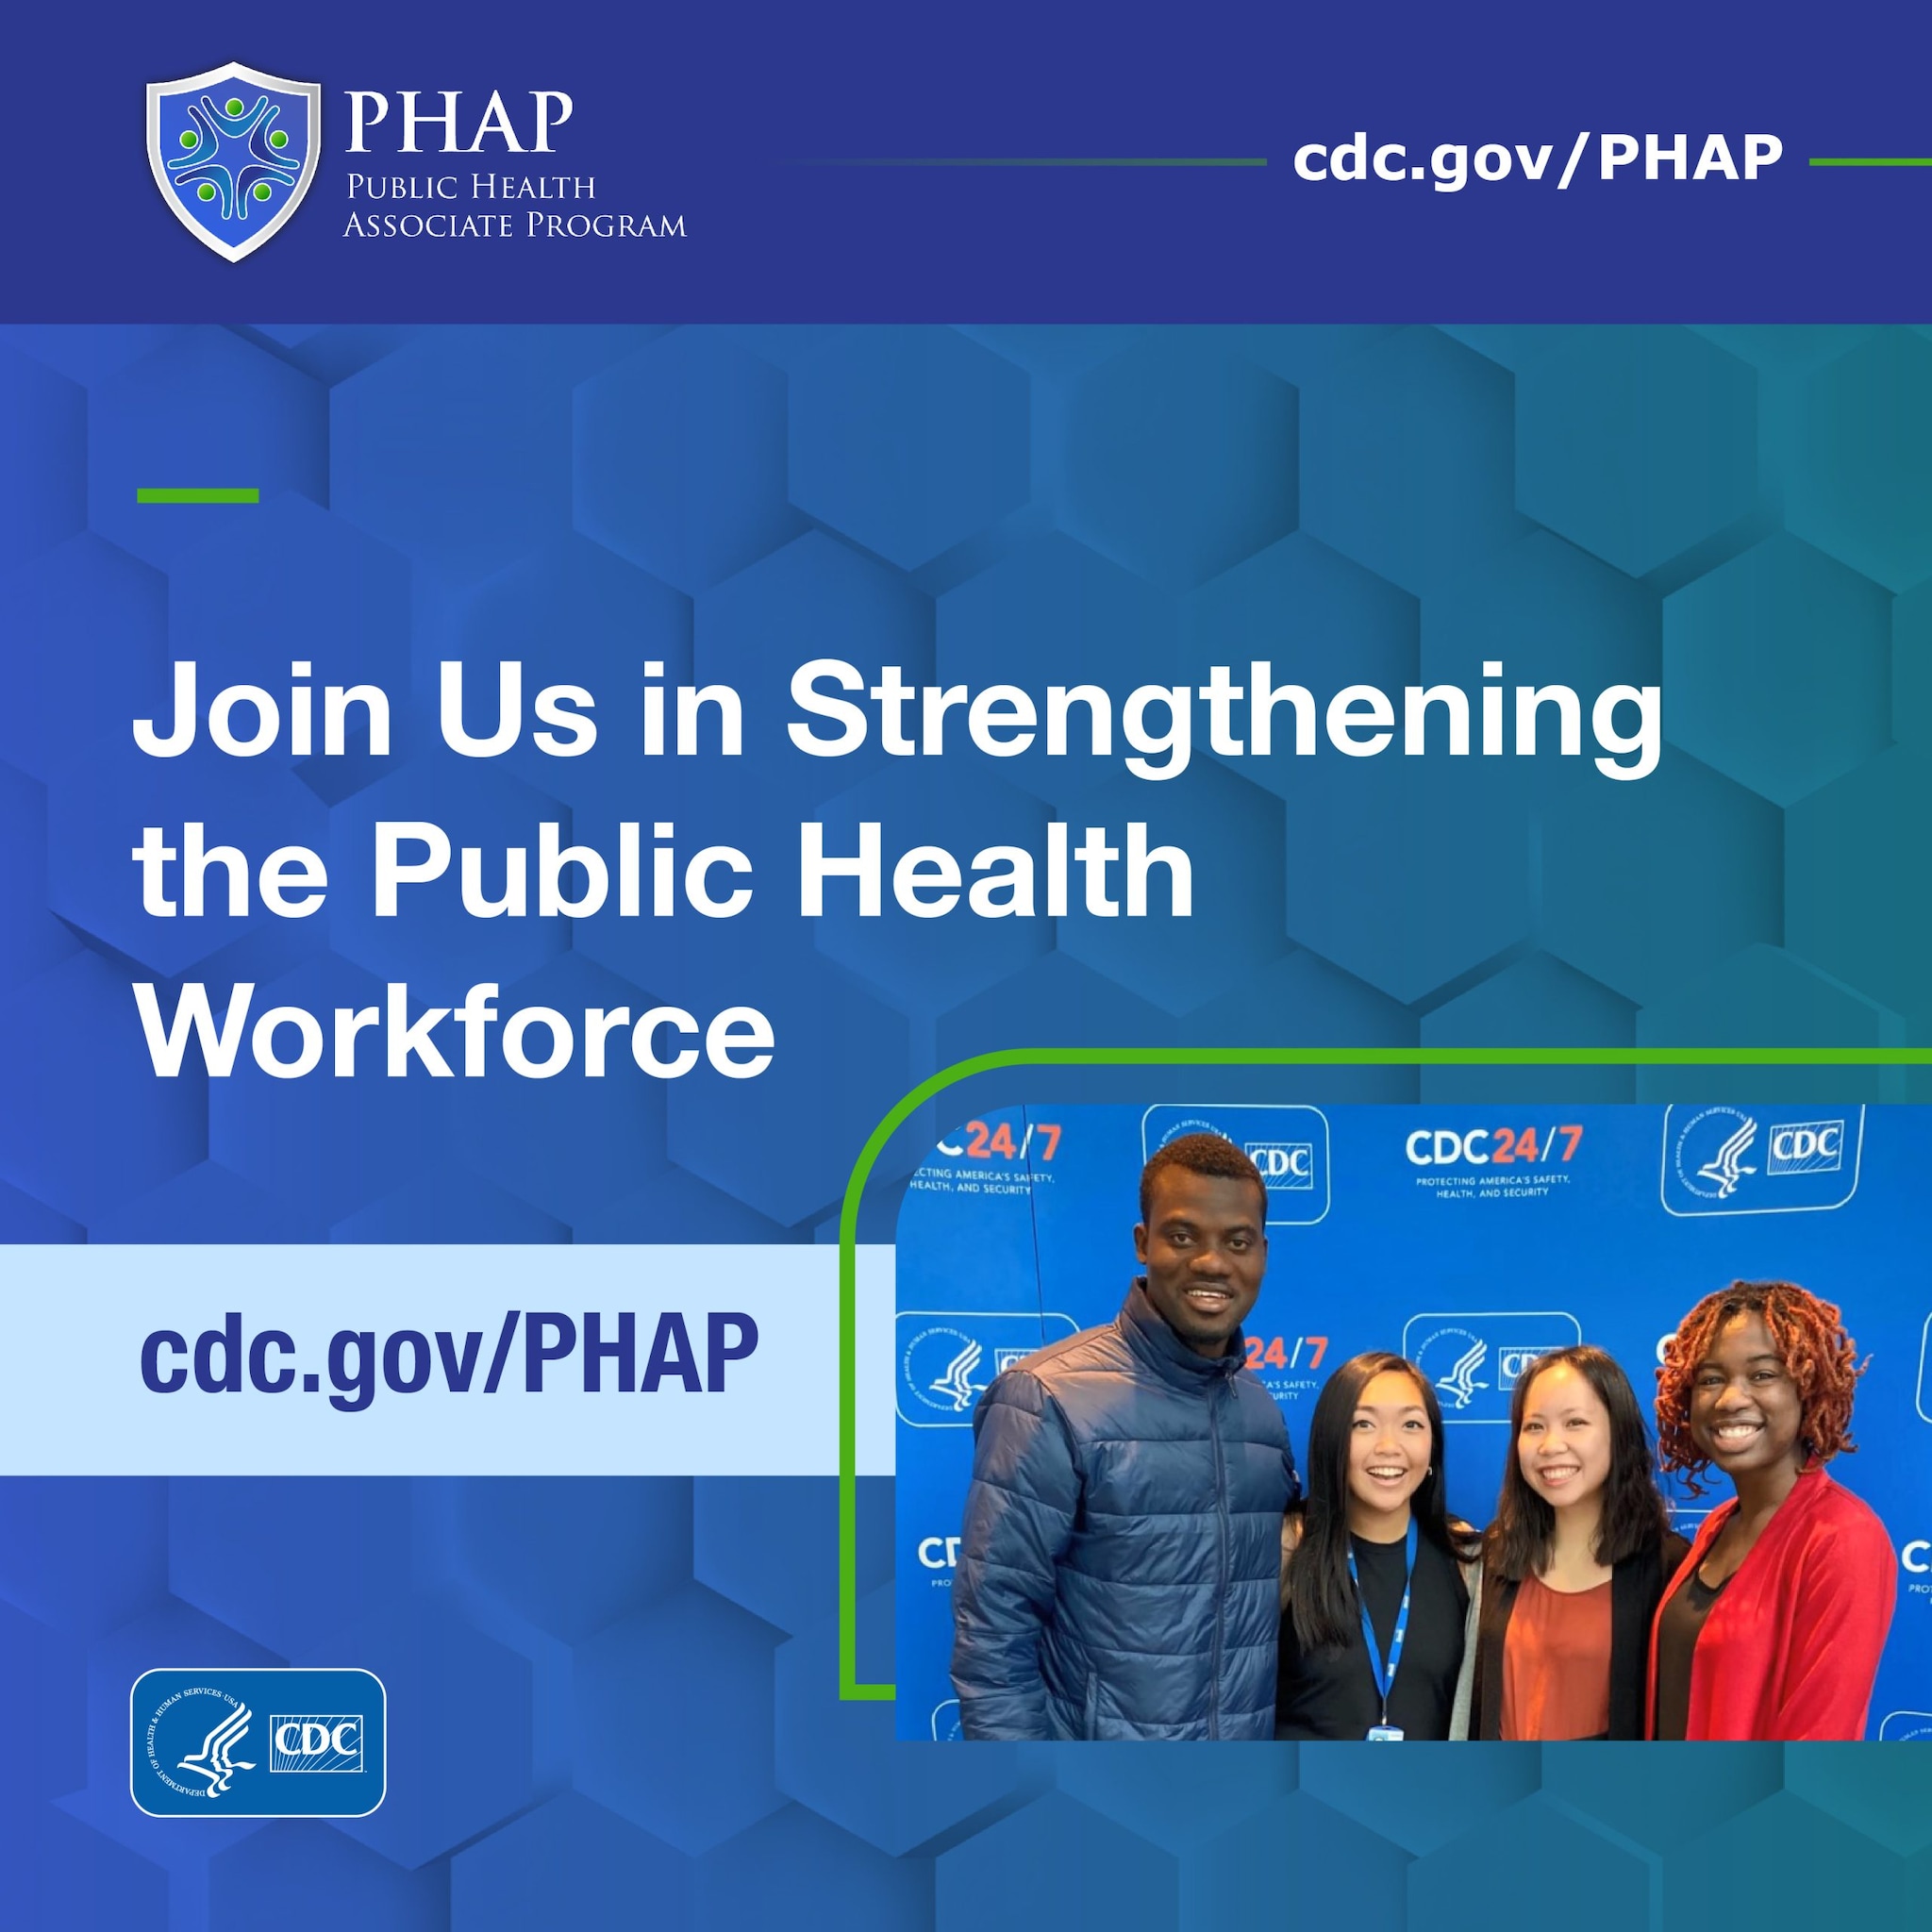 Join us in strengthening the Public Health workforce